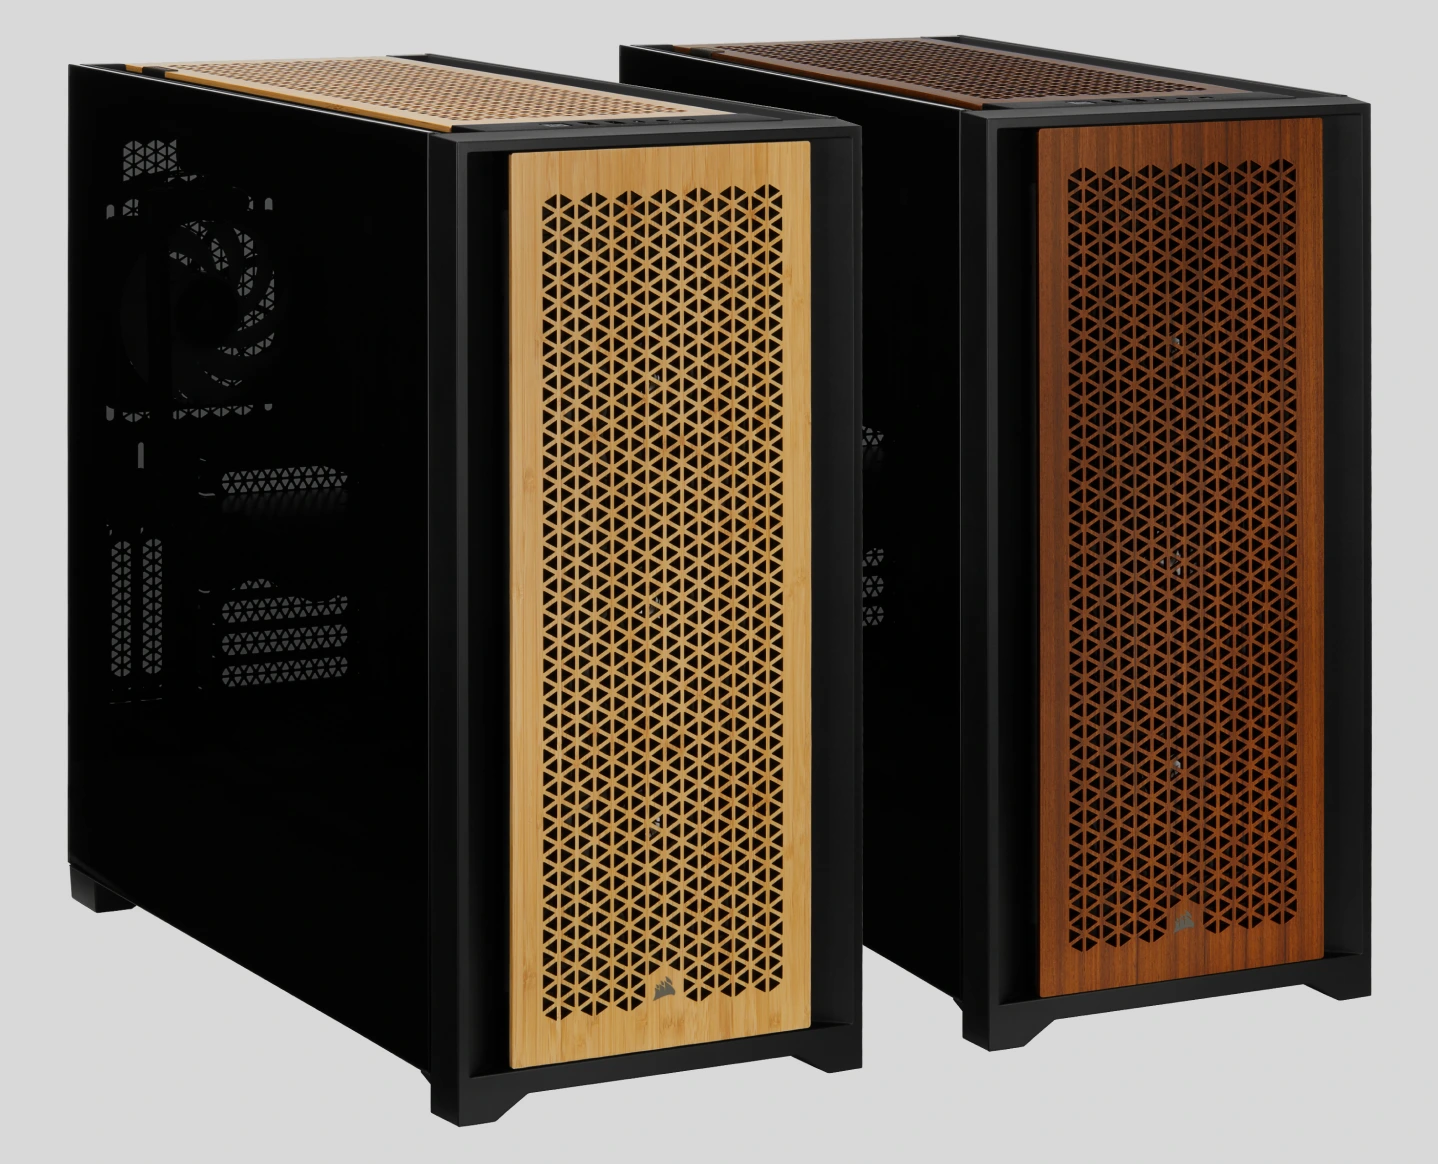 A 5000D Series case equipped with wooden front panel.